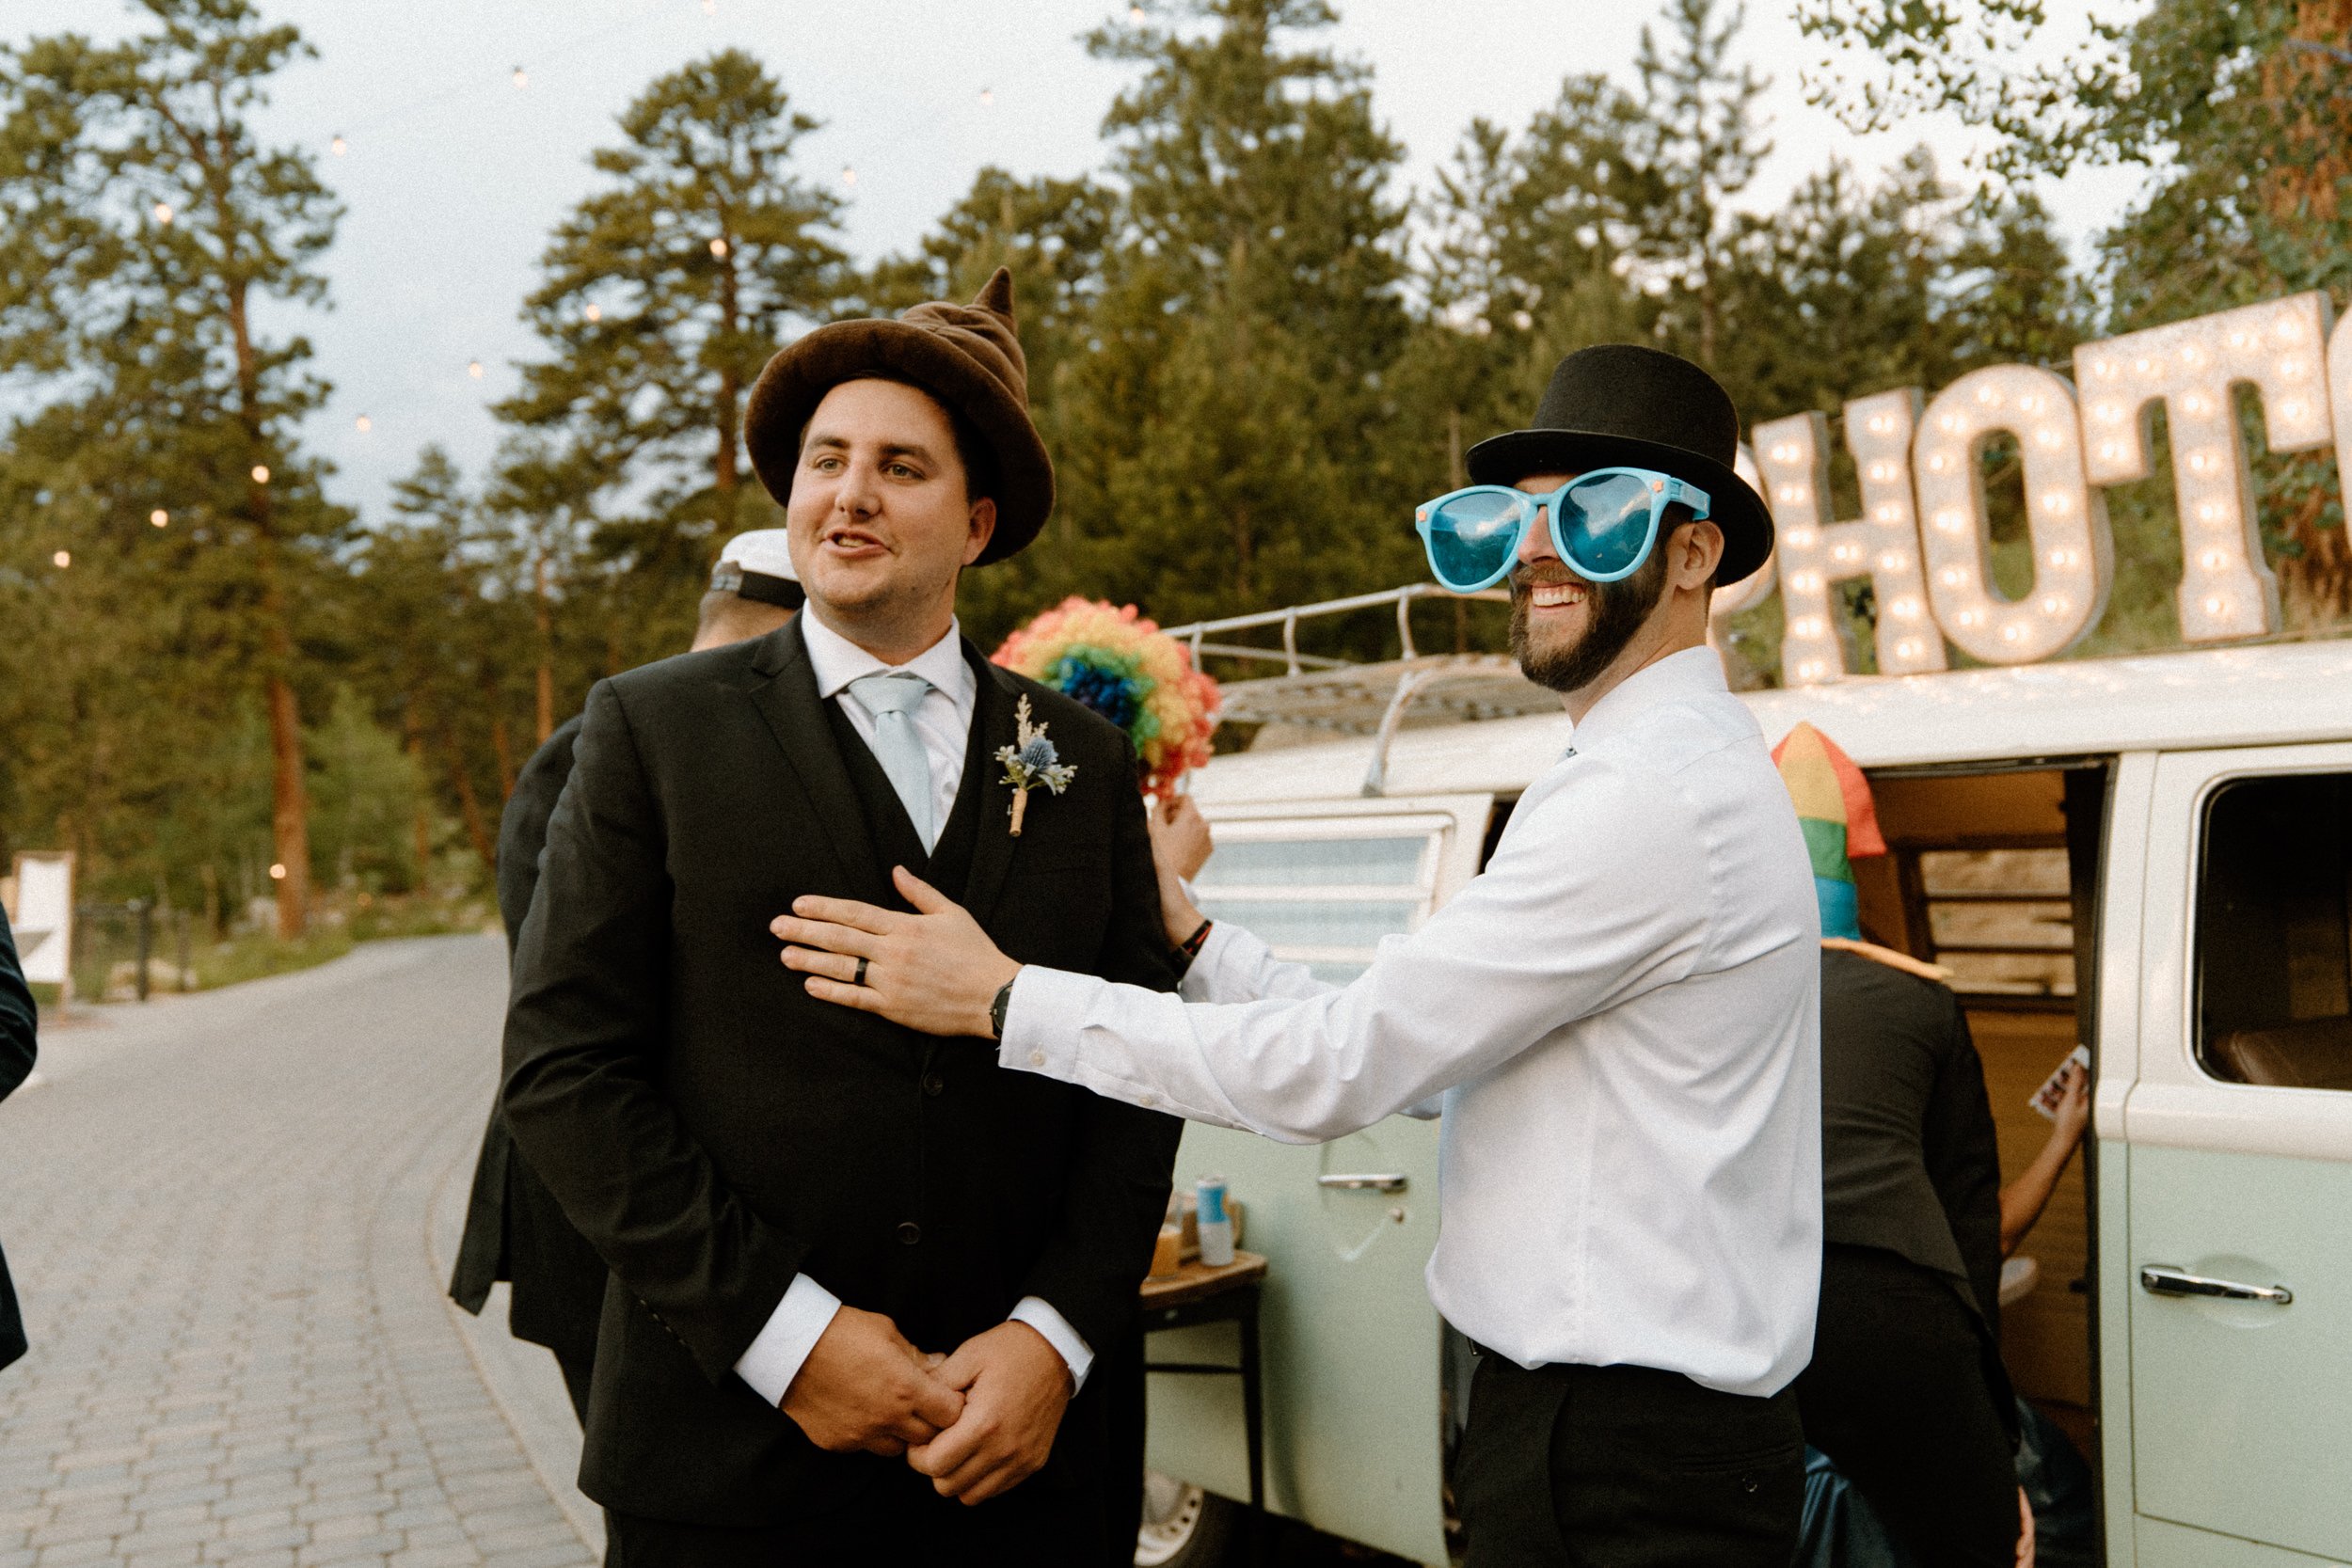 The groom and a groomsman put on funny props before the photo booth bus